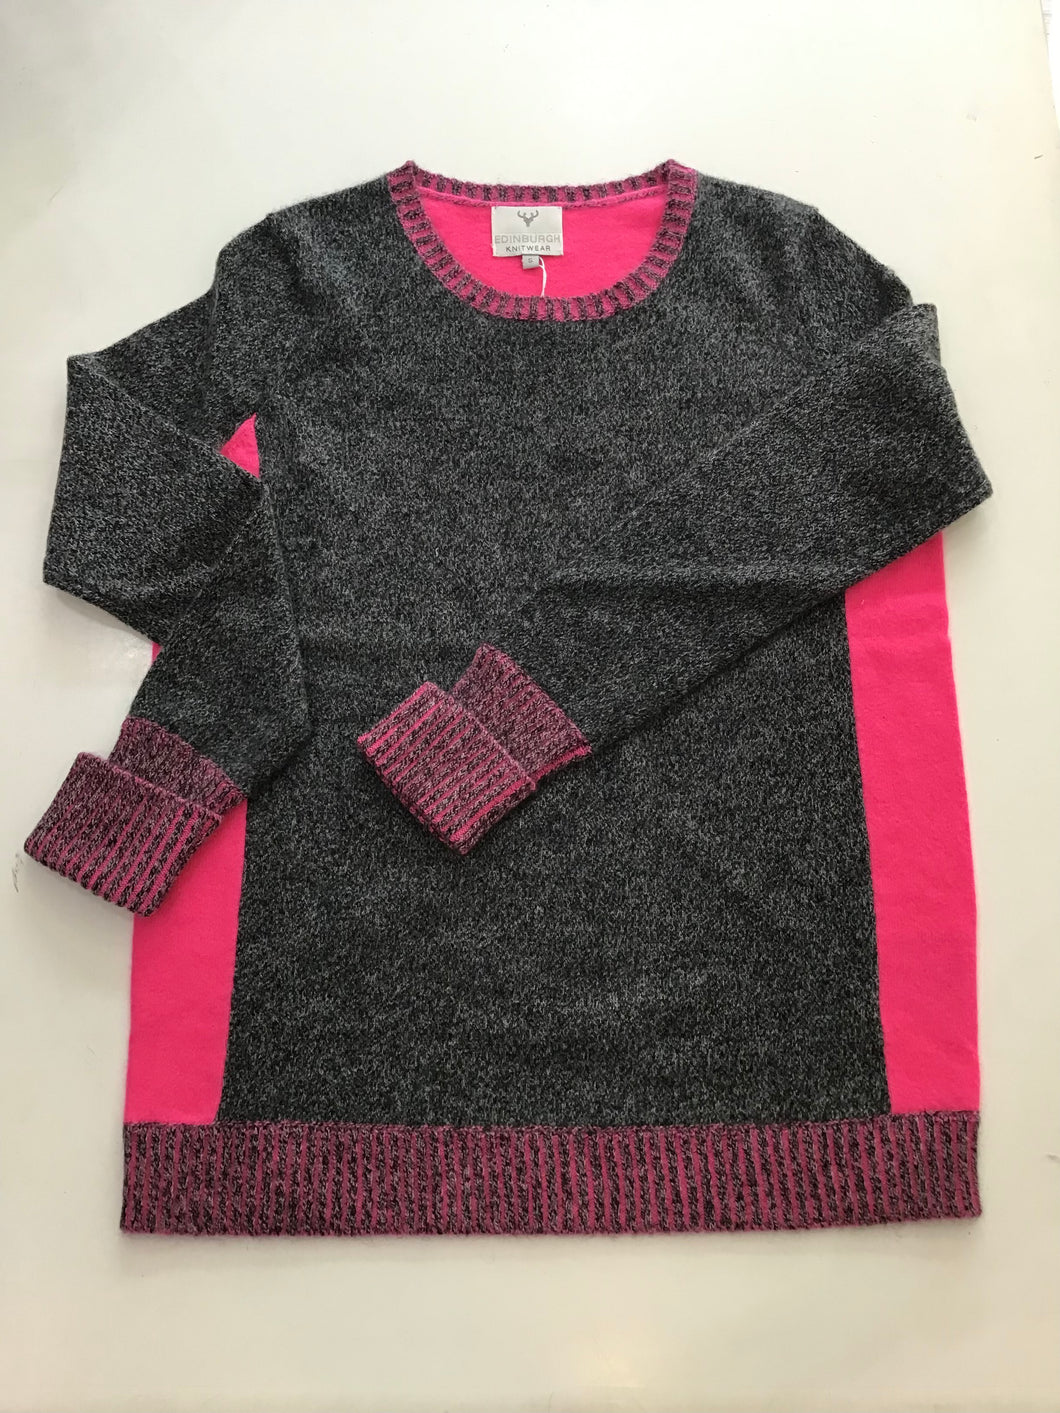 Contrast Back Sweater in Salt and Pepper with Shocking Pink by Edinburgh Knitwear